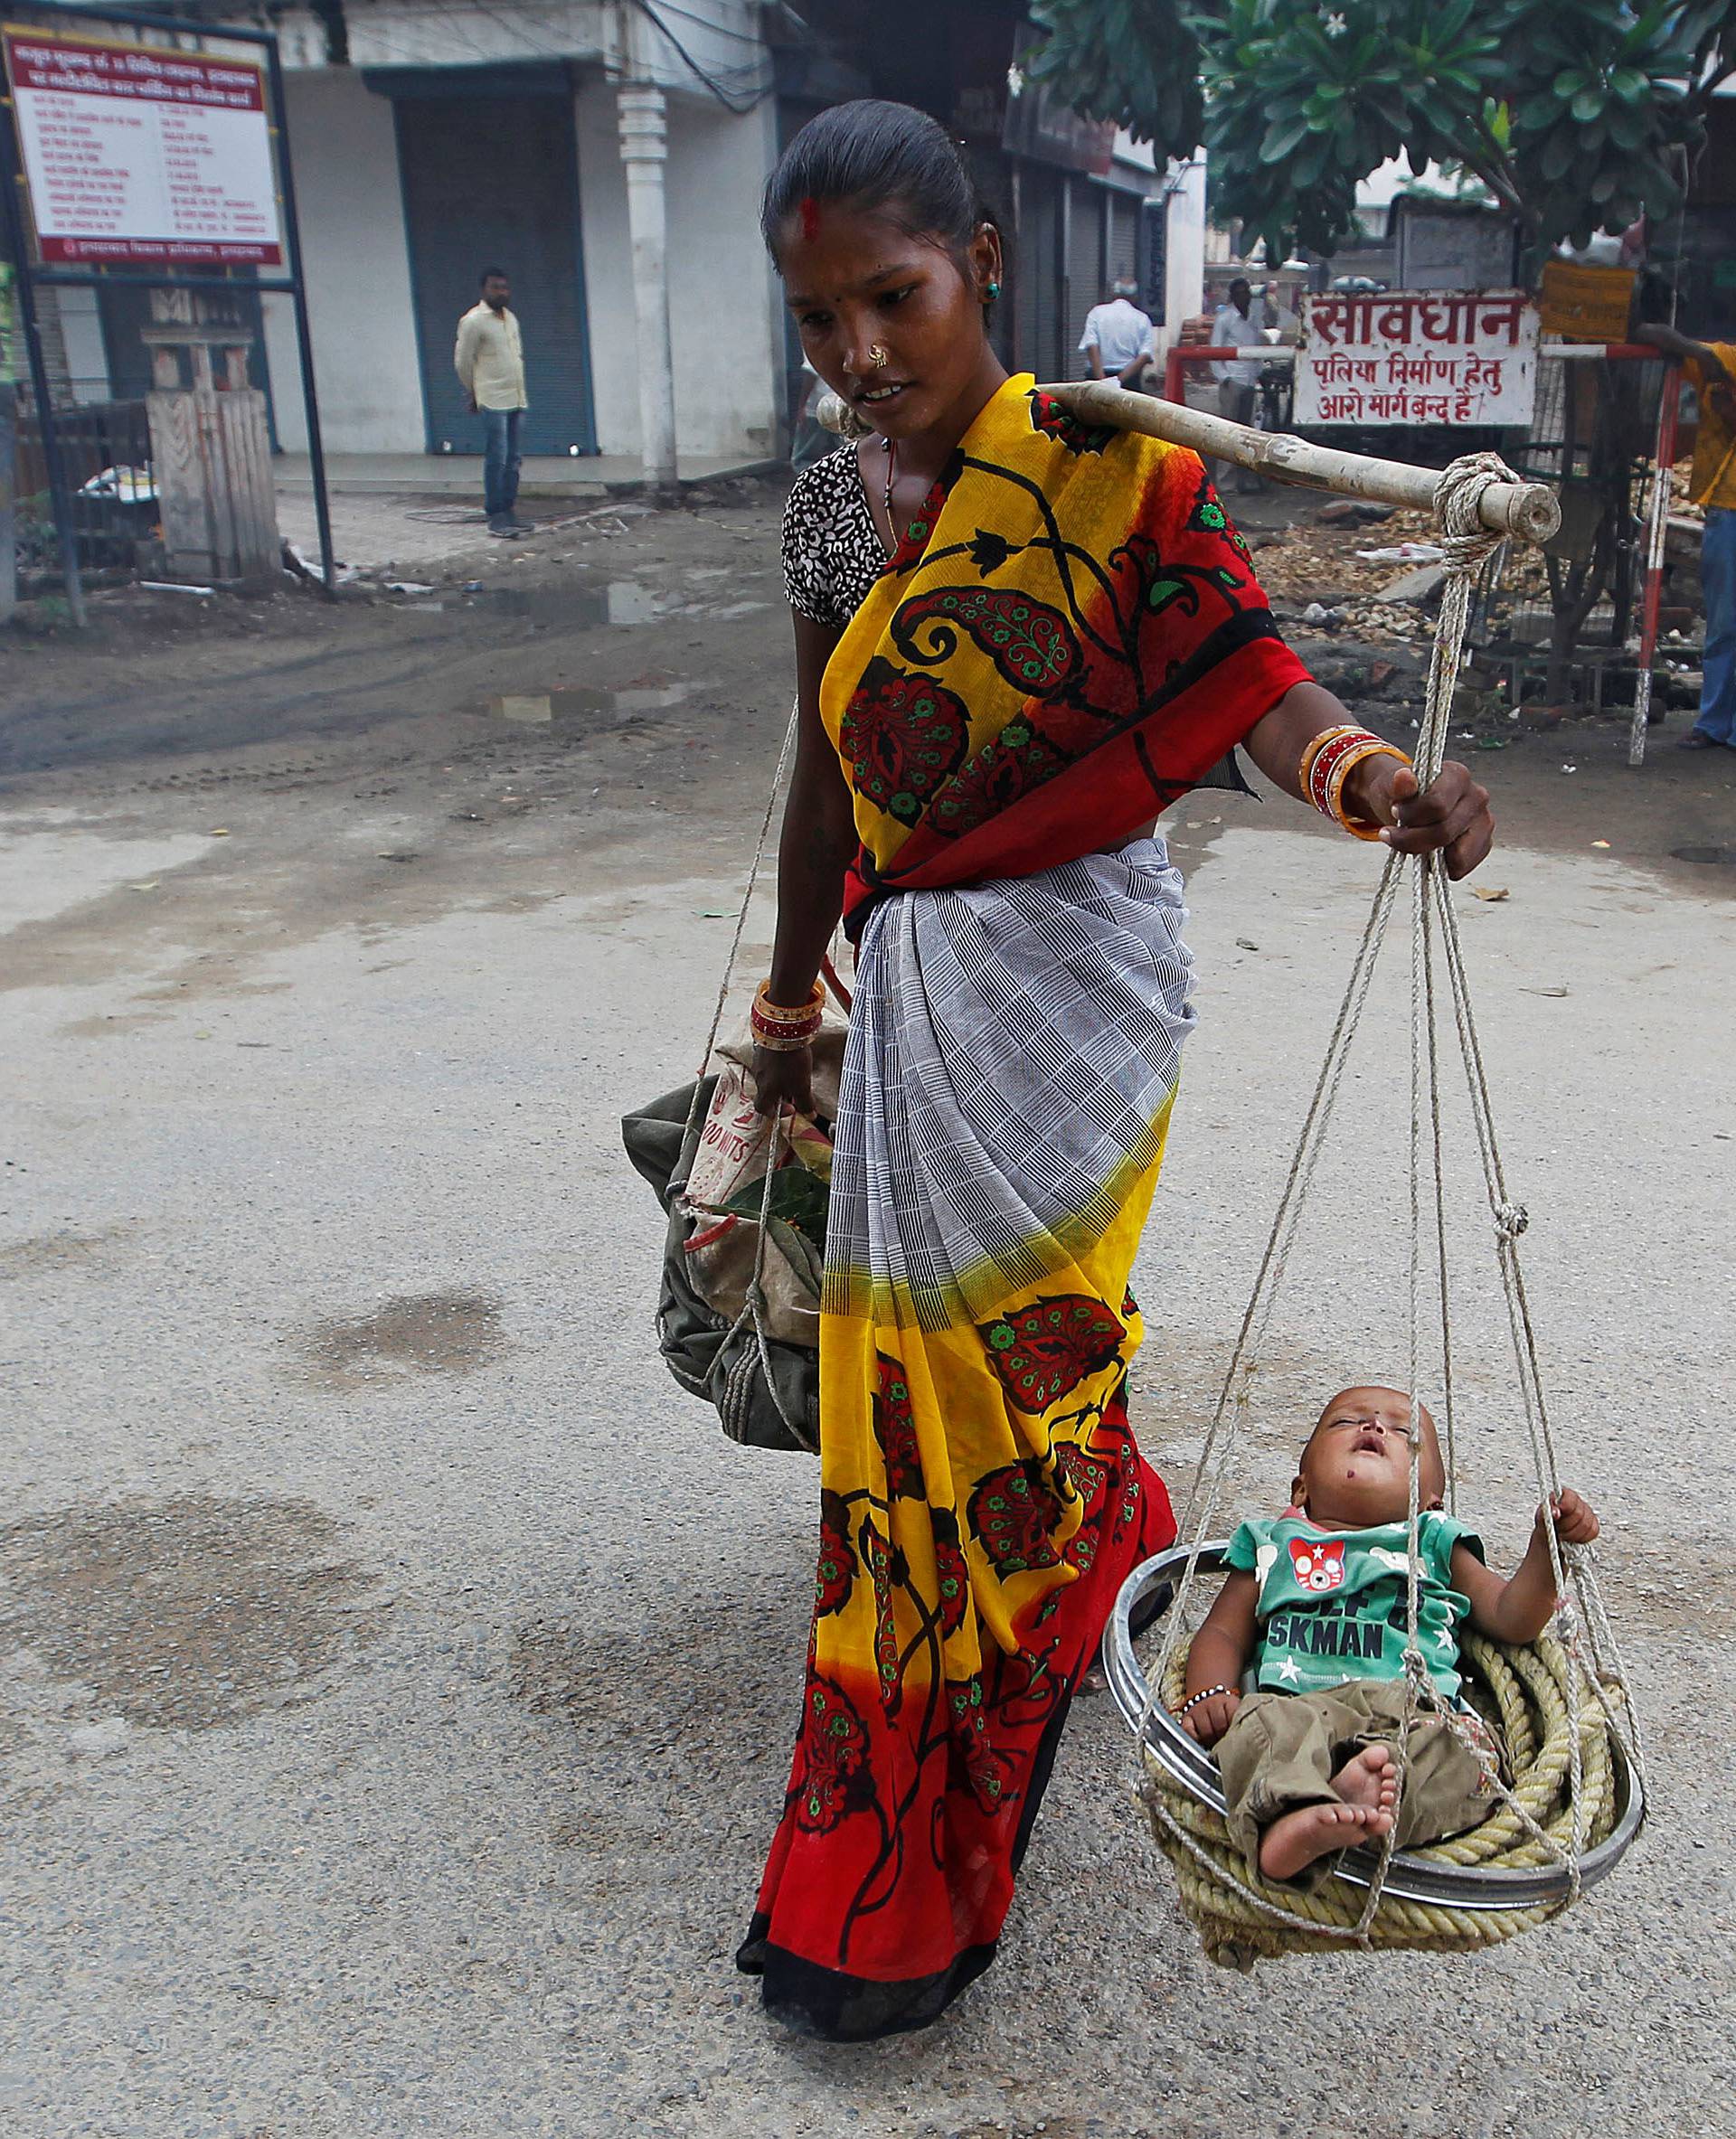 A woman carries her child in a basket as she walks on a road in Allahabad